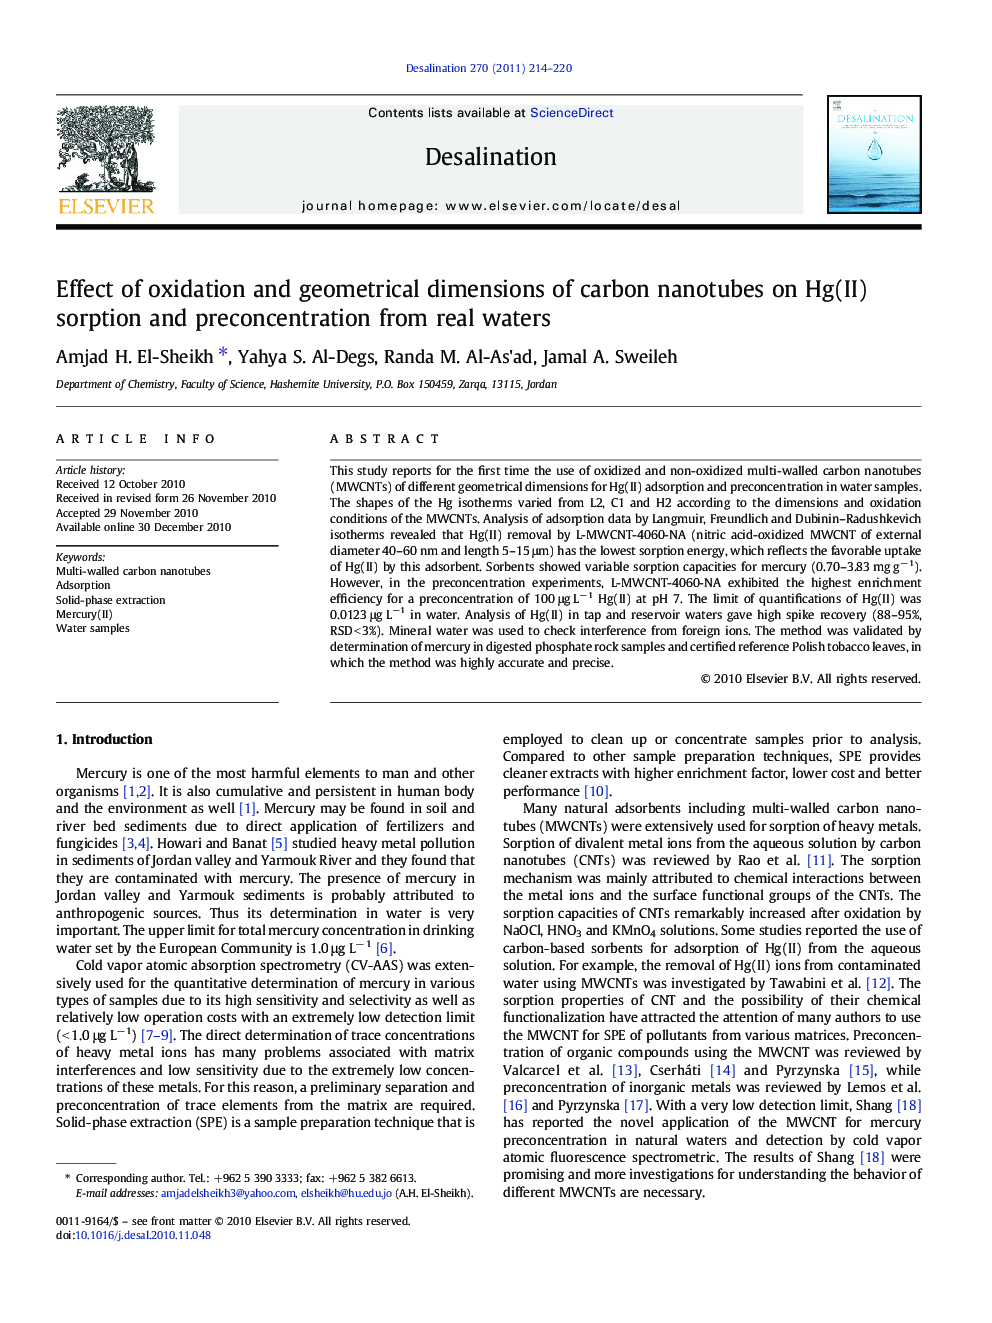 Effect of oxidation and geometrical dimensions of carbon nanotubes on Hg(II) sorption and preconcentration from real waters